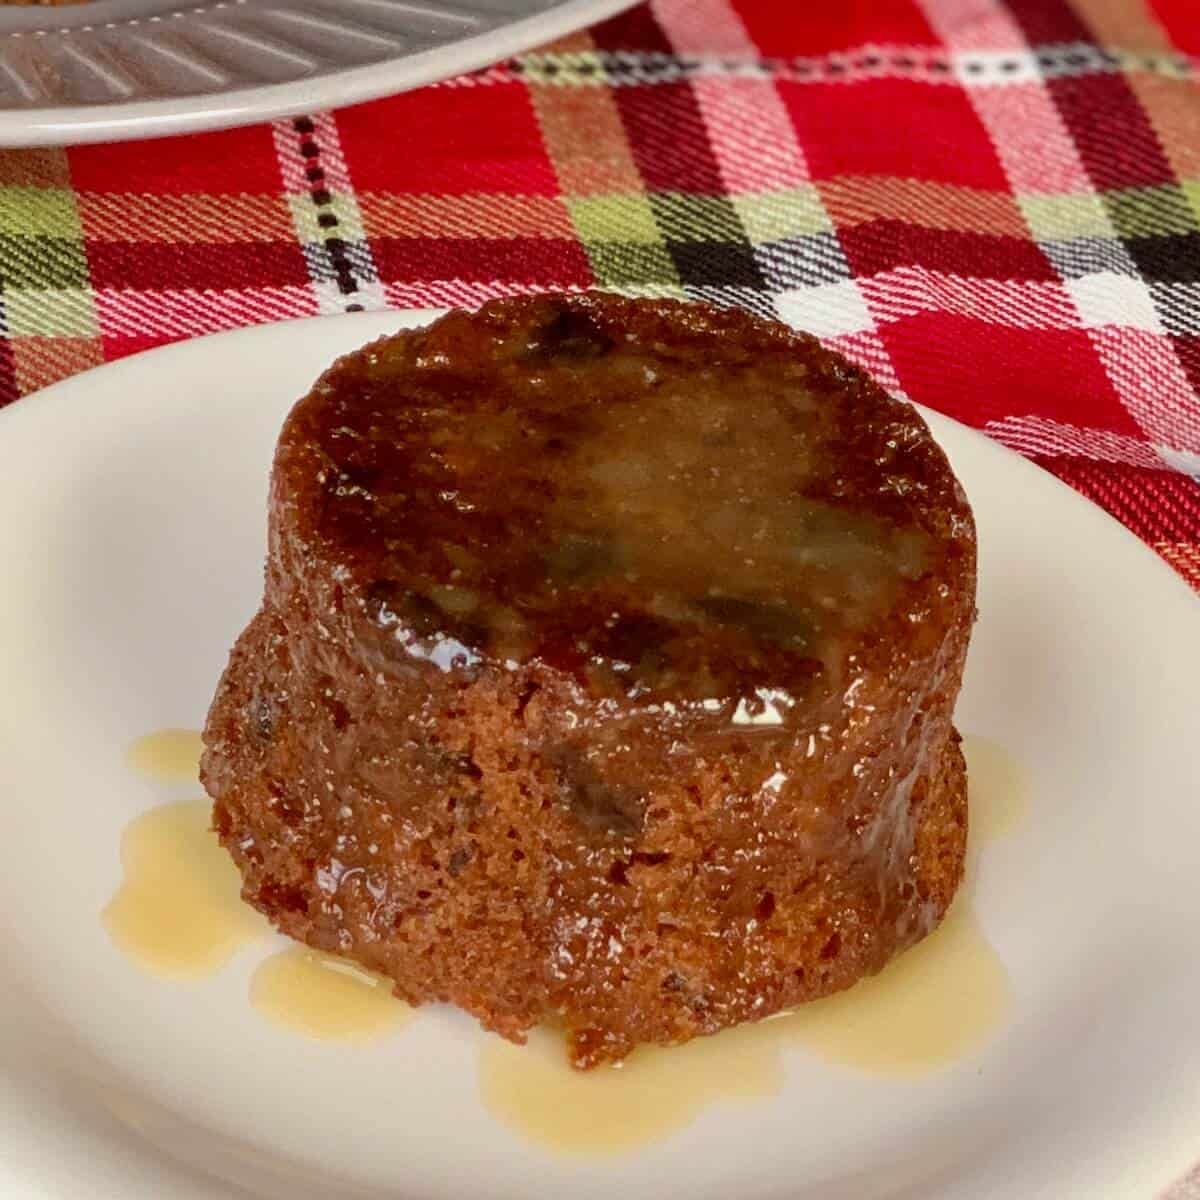 Sticky Toffee Pudding on white plate on plaid napkin.